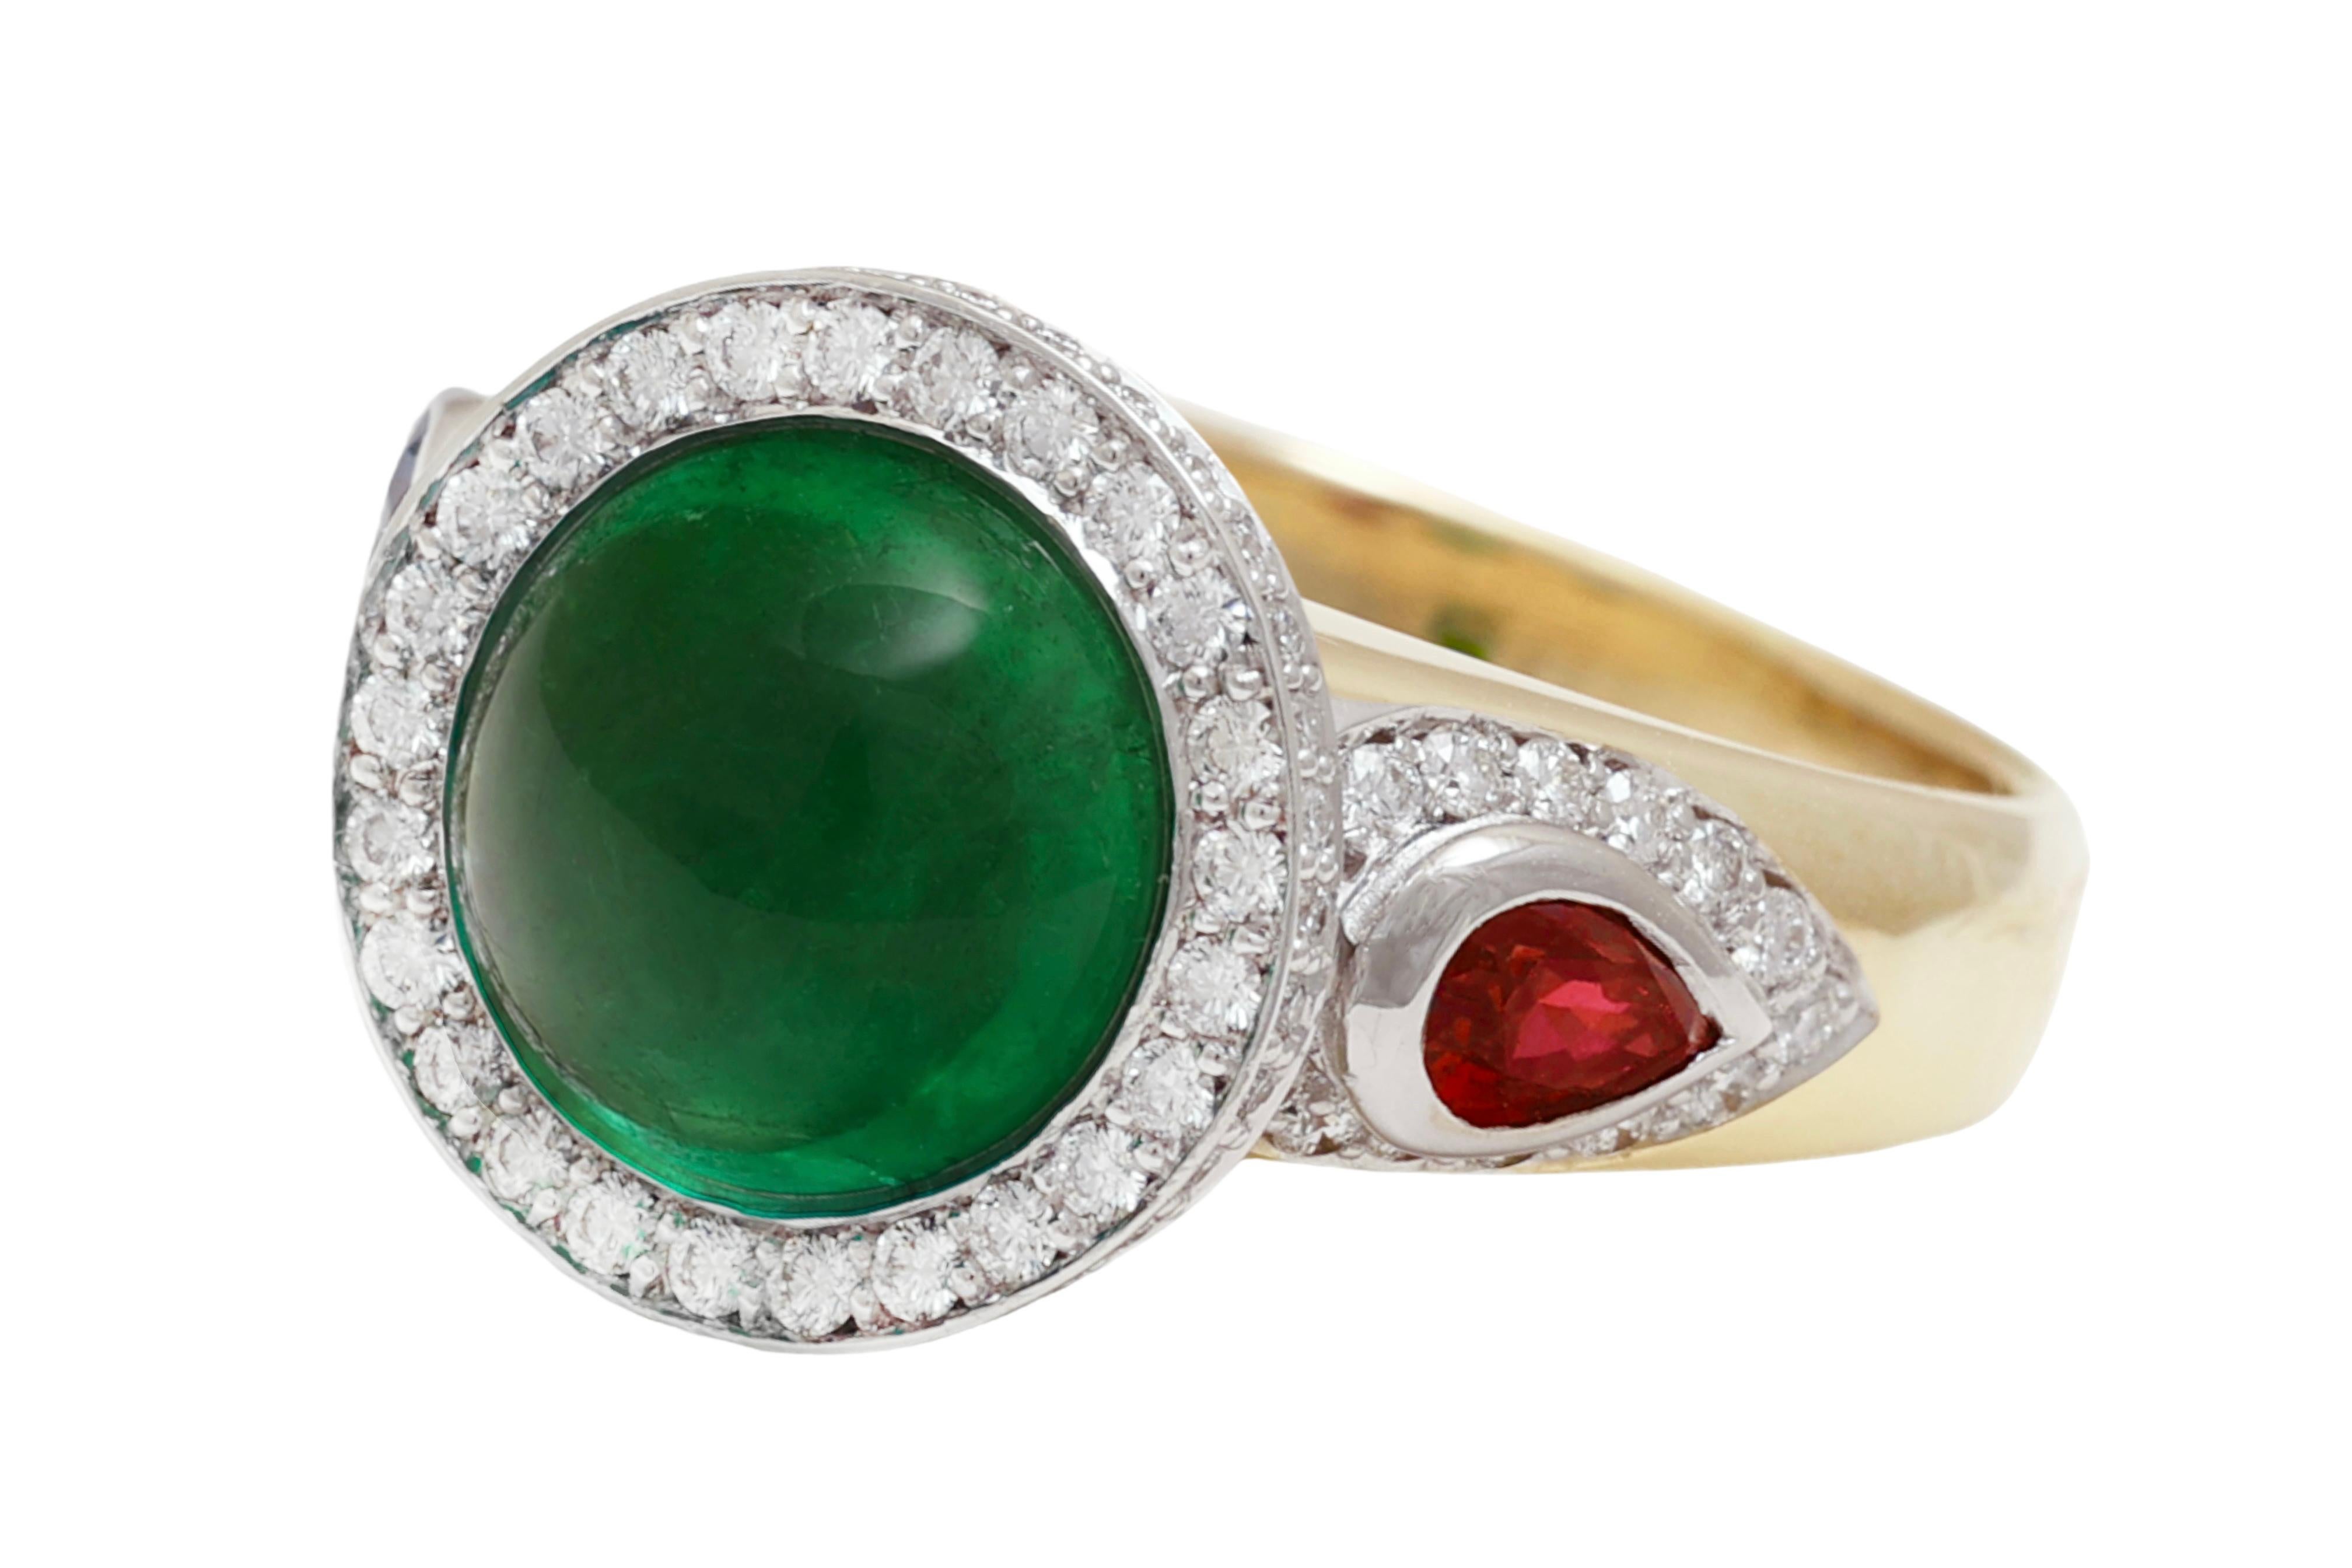 Very special, Beautiful 18 kt. Yellow Gold Ring With 3.78 ct. Minor Emerald Cabochon, Diamonds, Sapphire, Ruby 

Emerald: Intense Green Minor Cabochon 3.78 ct. with Carat Gem Lab certificate CGL 15818 

Sapphire: 1 pear shape sapphire 0.20